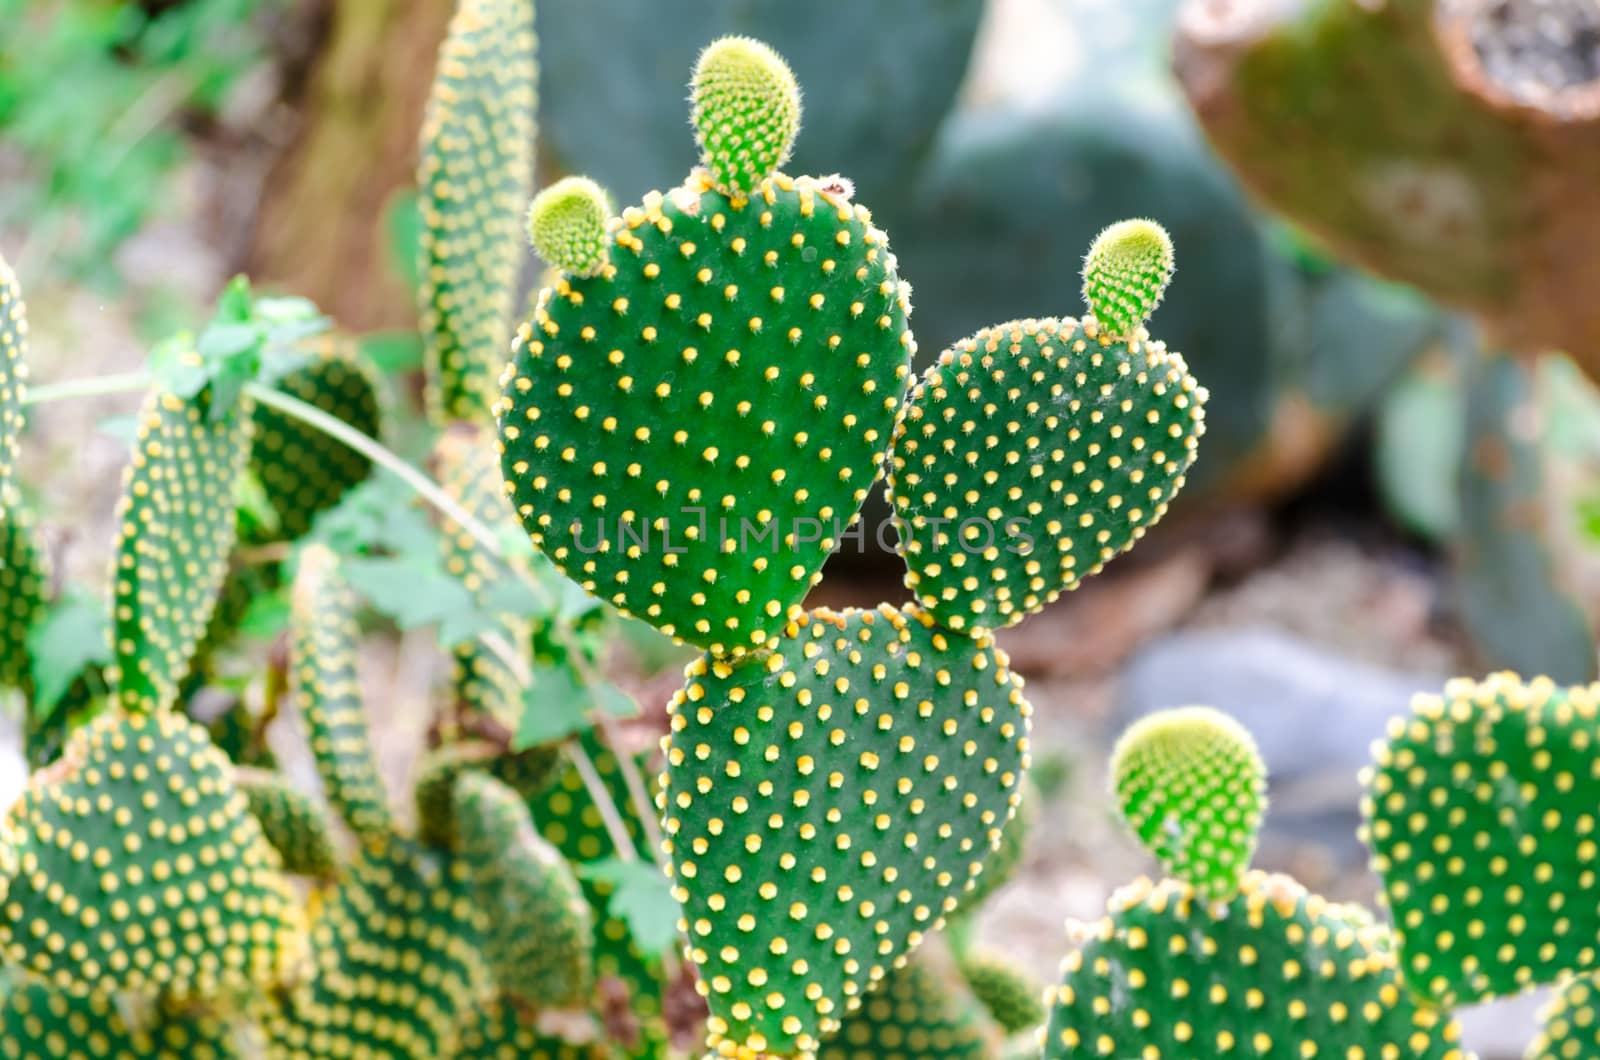 Cactus, Opuntia by JFsPic